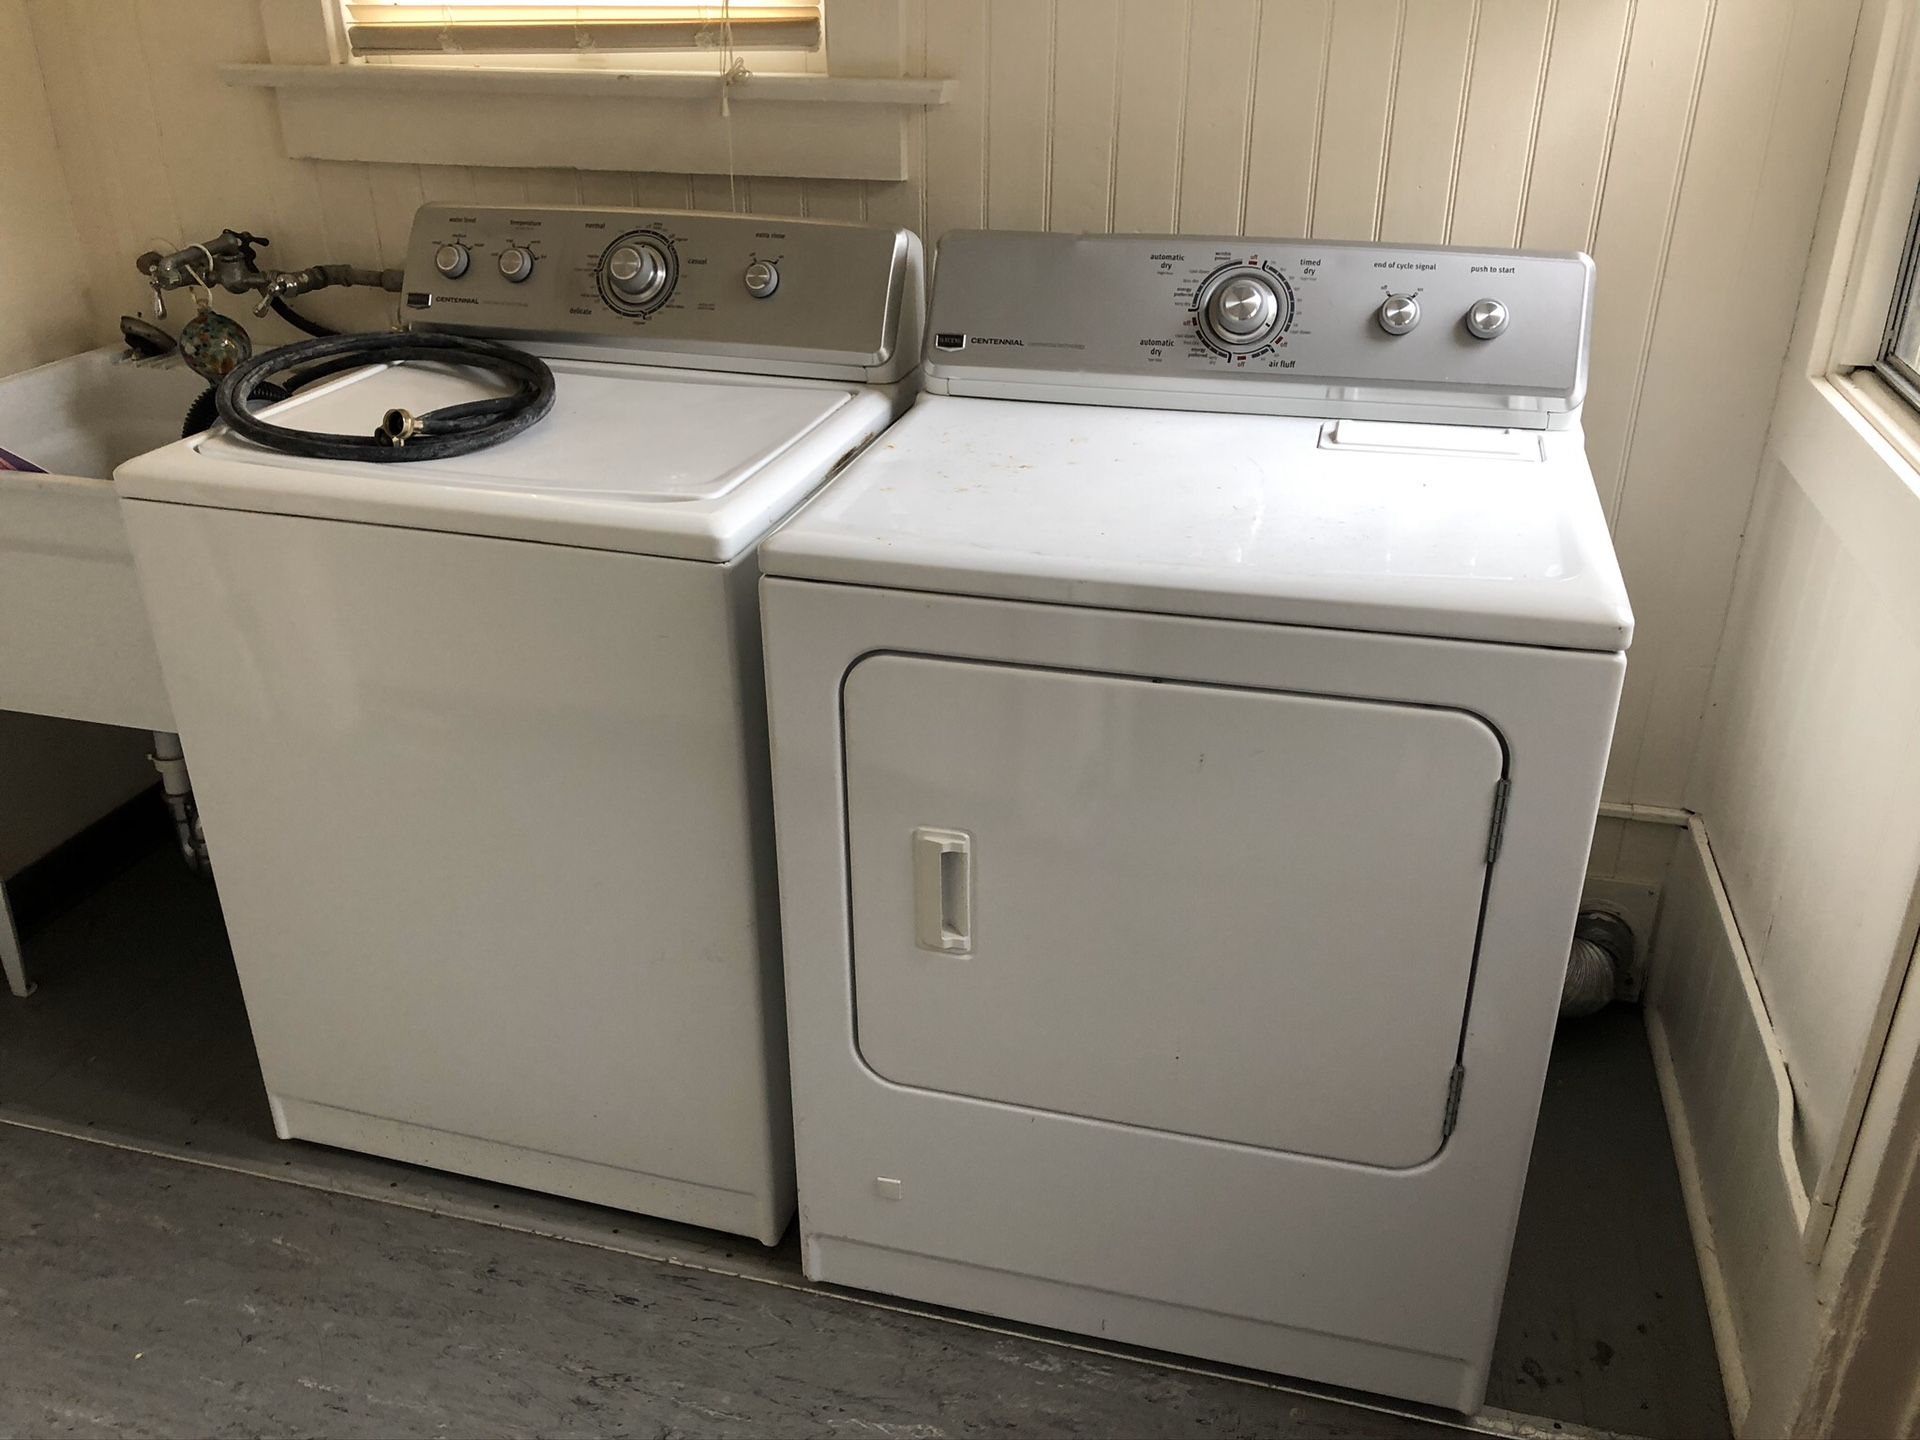 Maytag washer and gas dryer- works